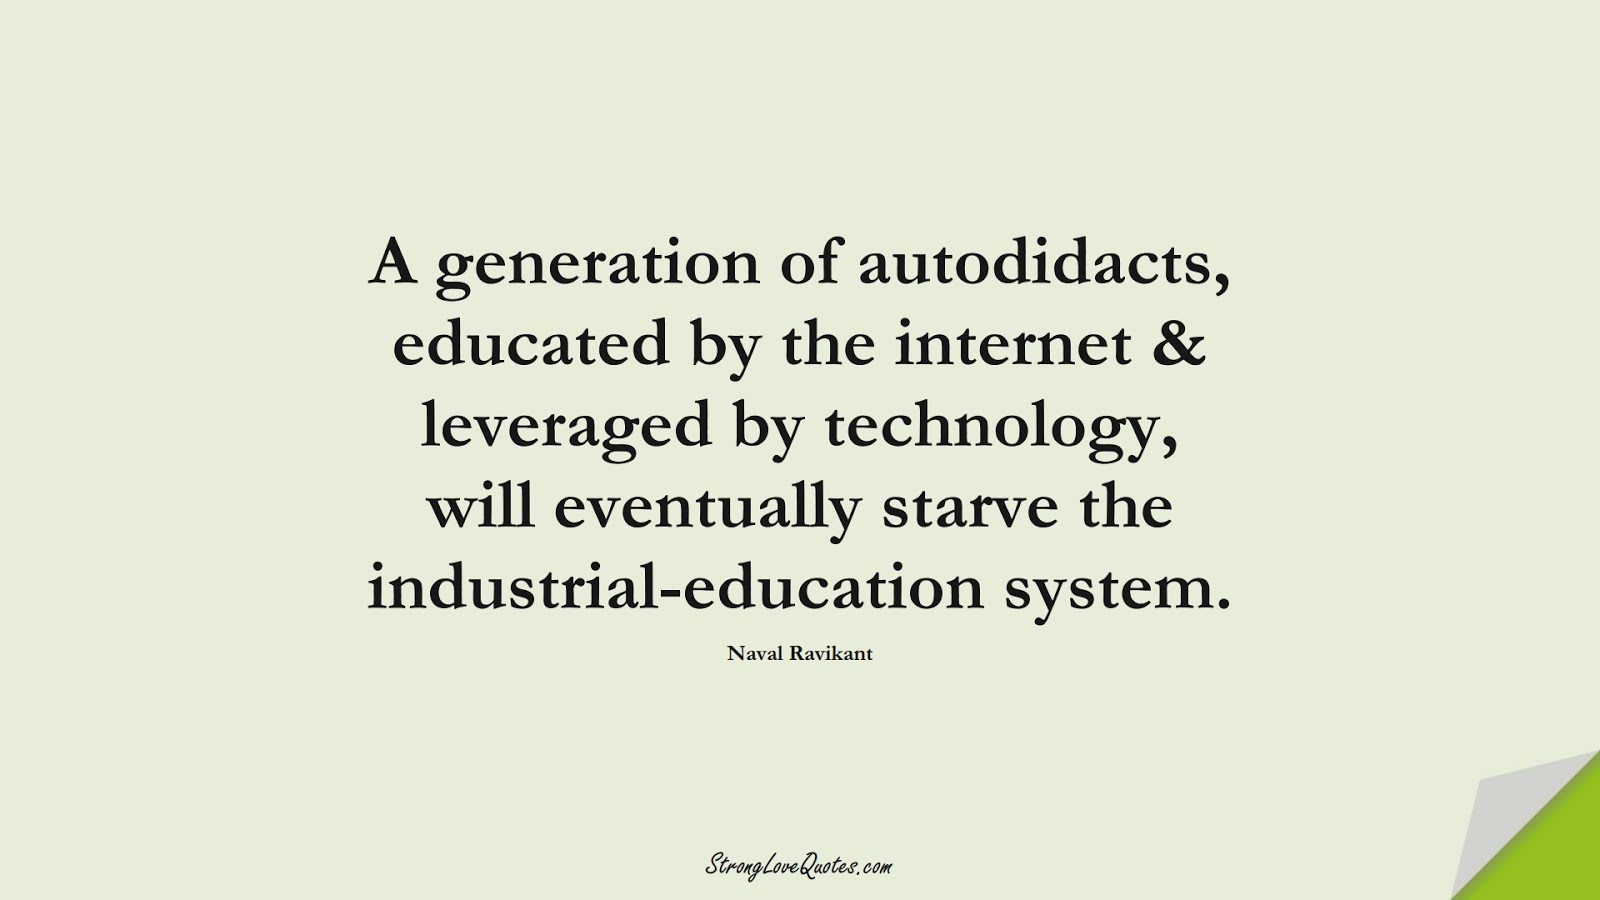 A generation of autodidacts, educated by the internet & leveraged by technology, will eventually starve the industrial-education system. (Naval Ravikant);  #KnowledgeQuotes